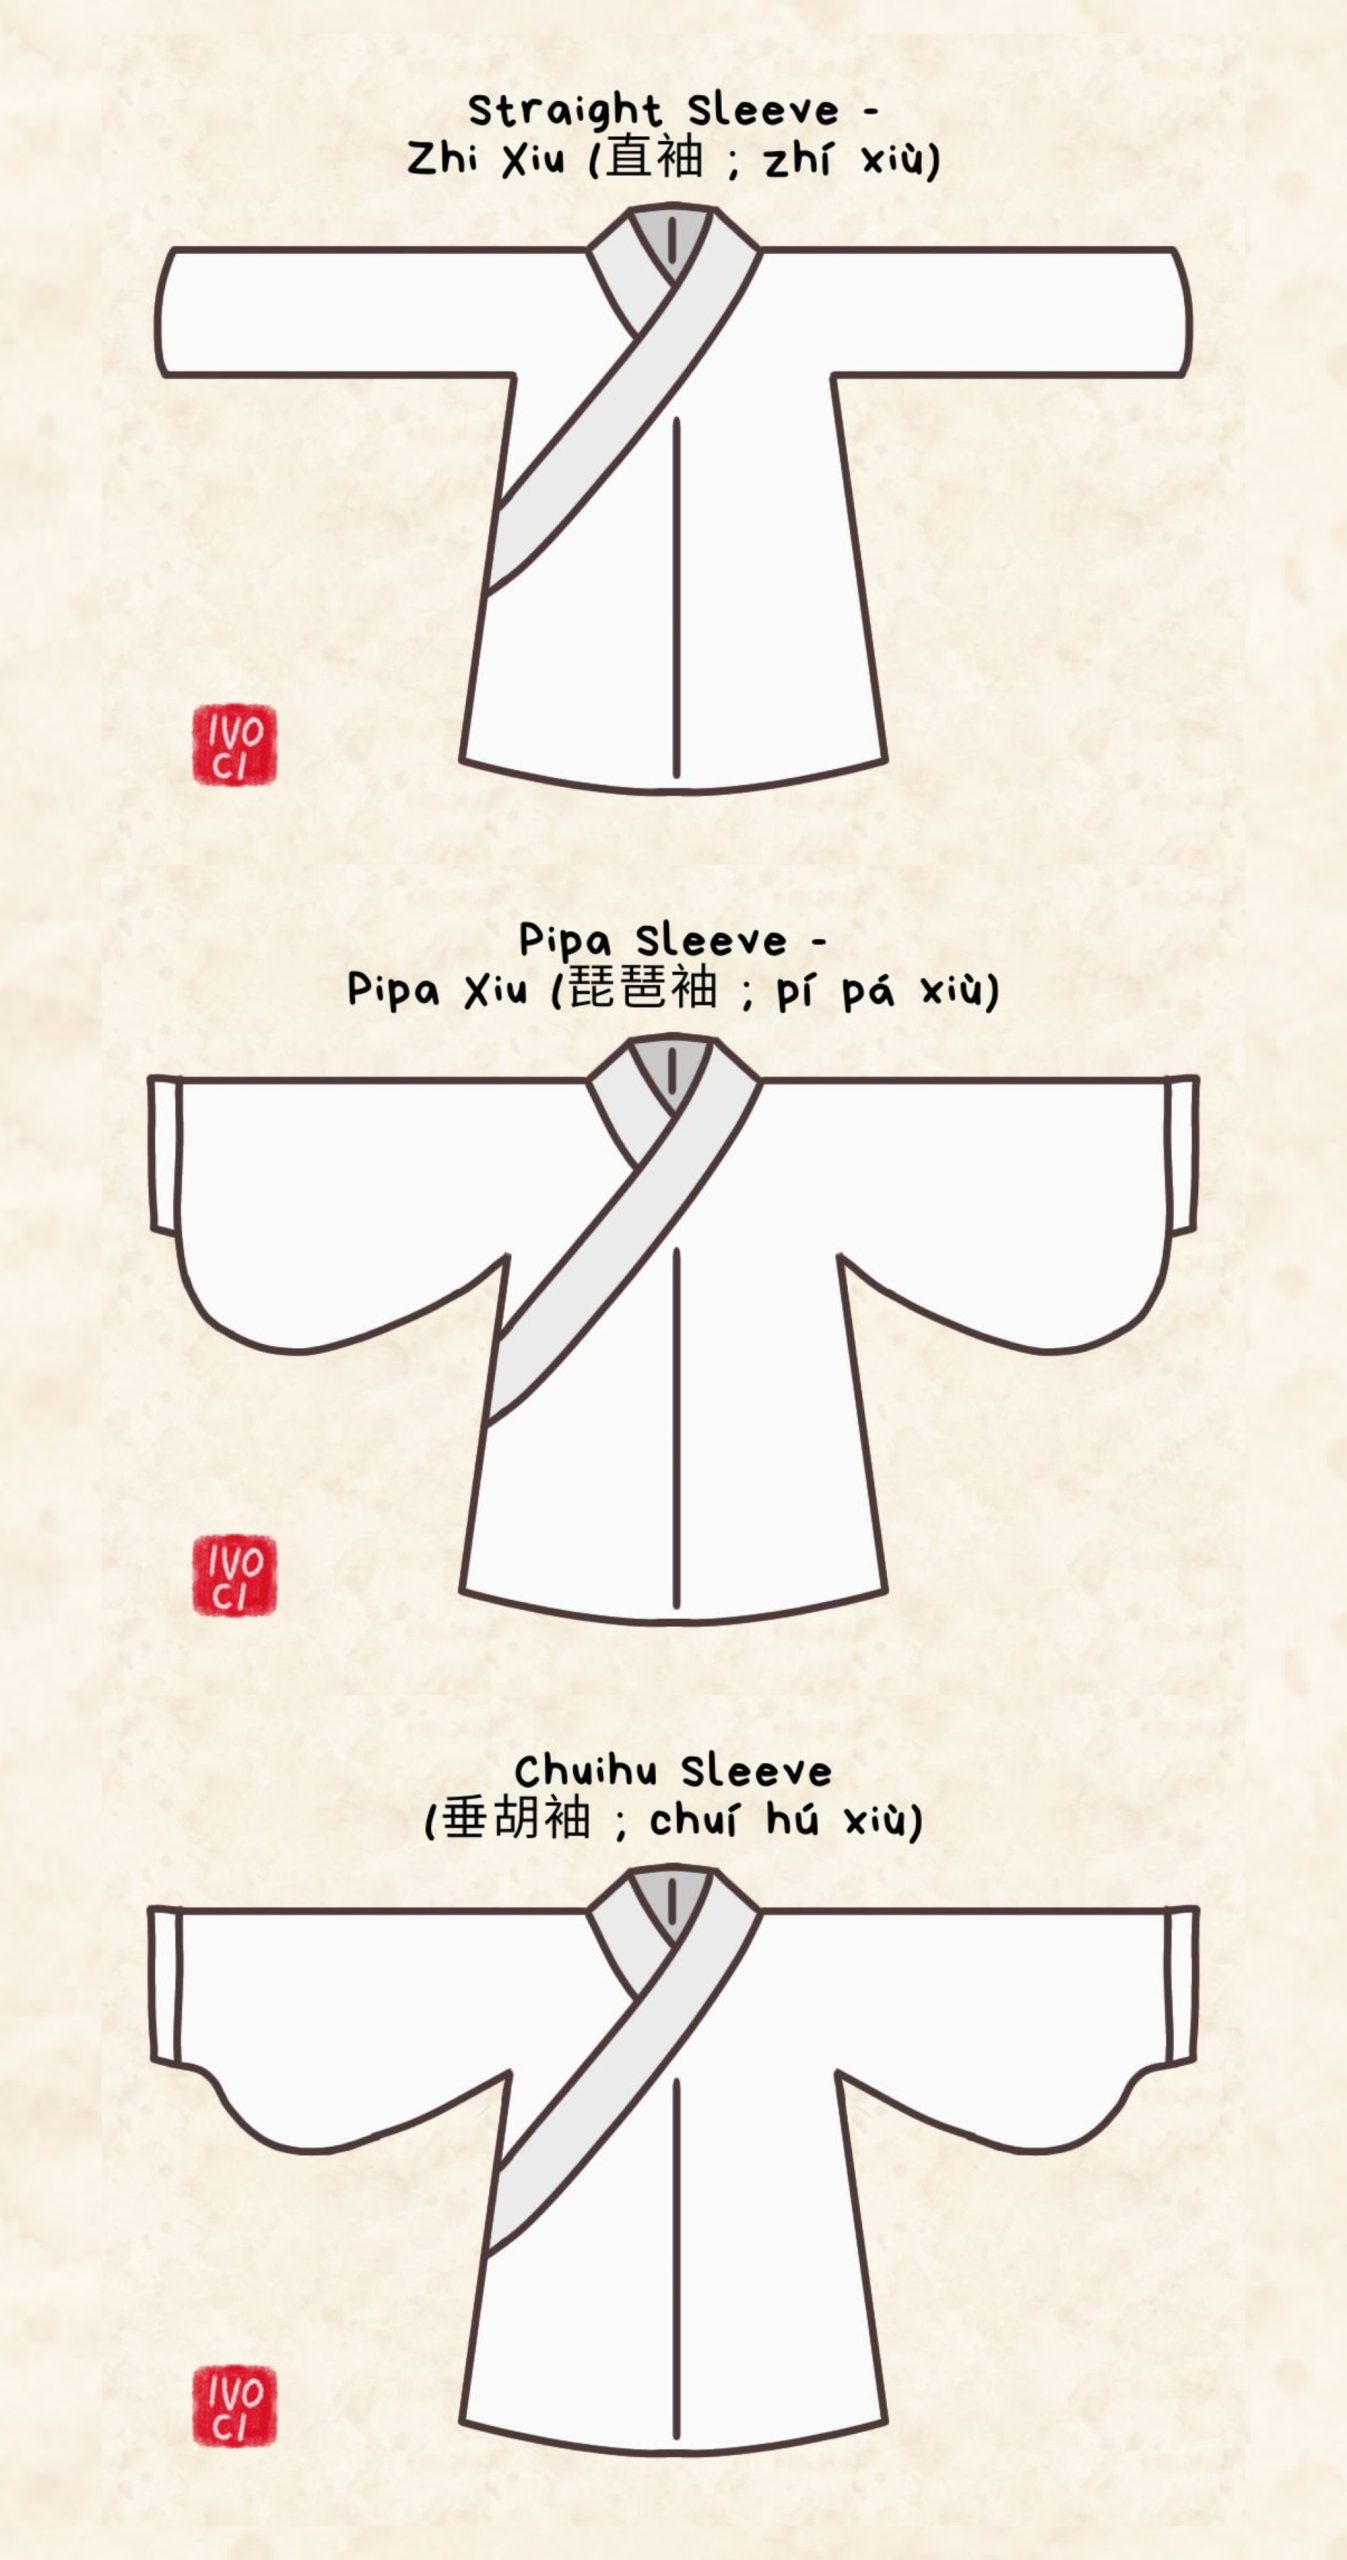 ivoci - Easily Confused Hanfu Structures - 3